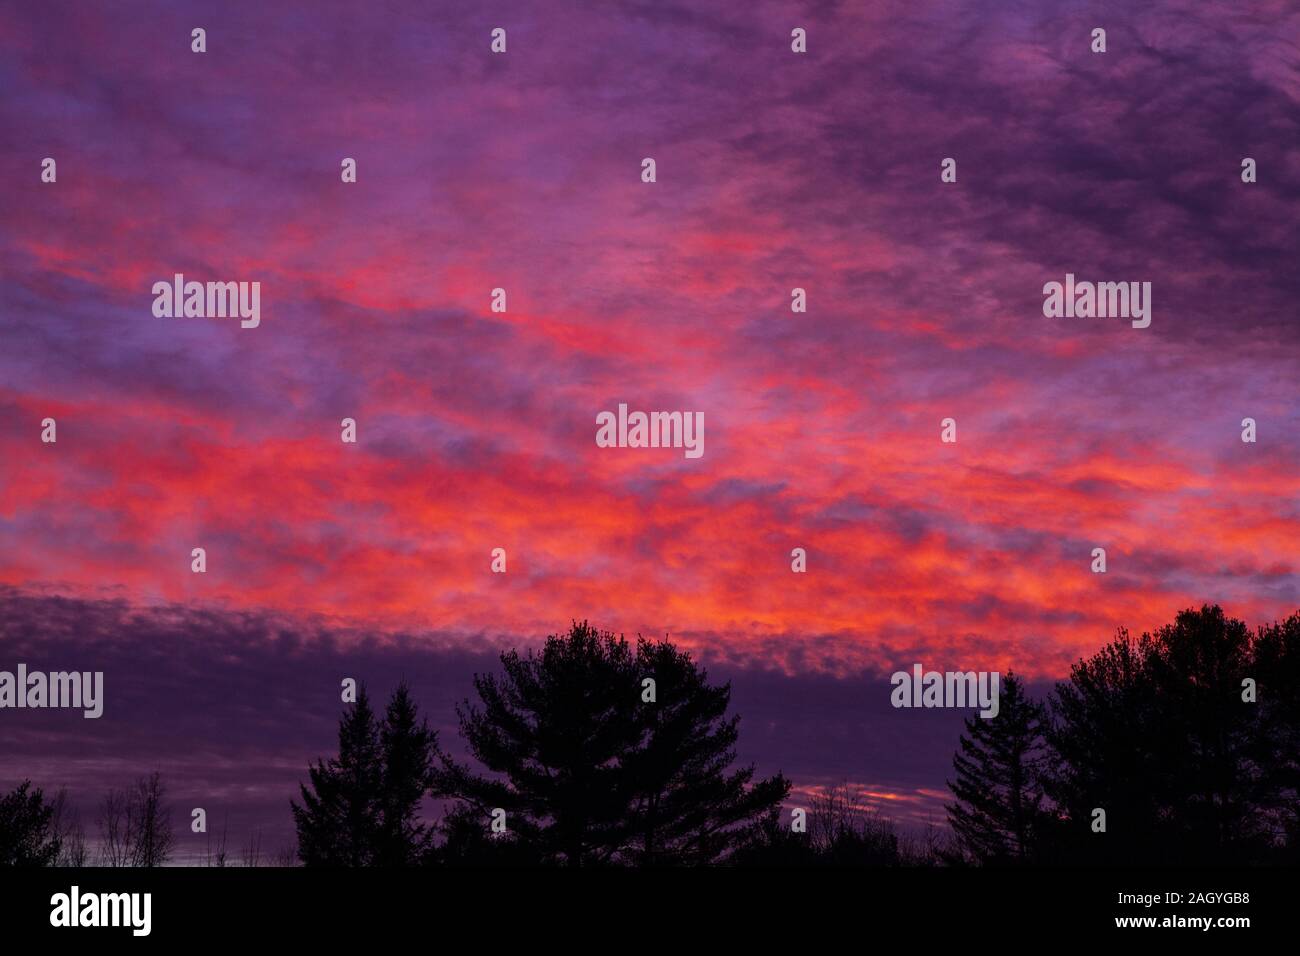 A cloudy red winter sky at sunset in Maine.  Beautiful and scenic. Stock Photo